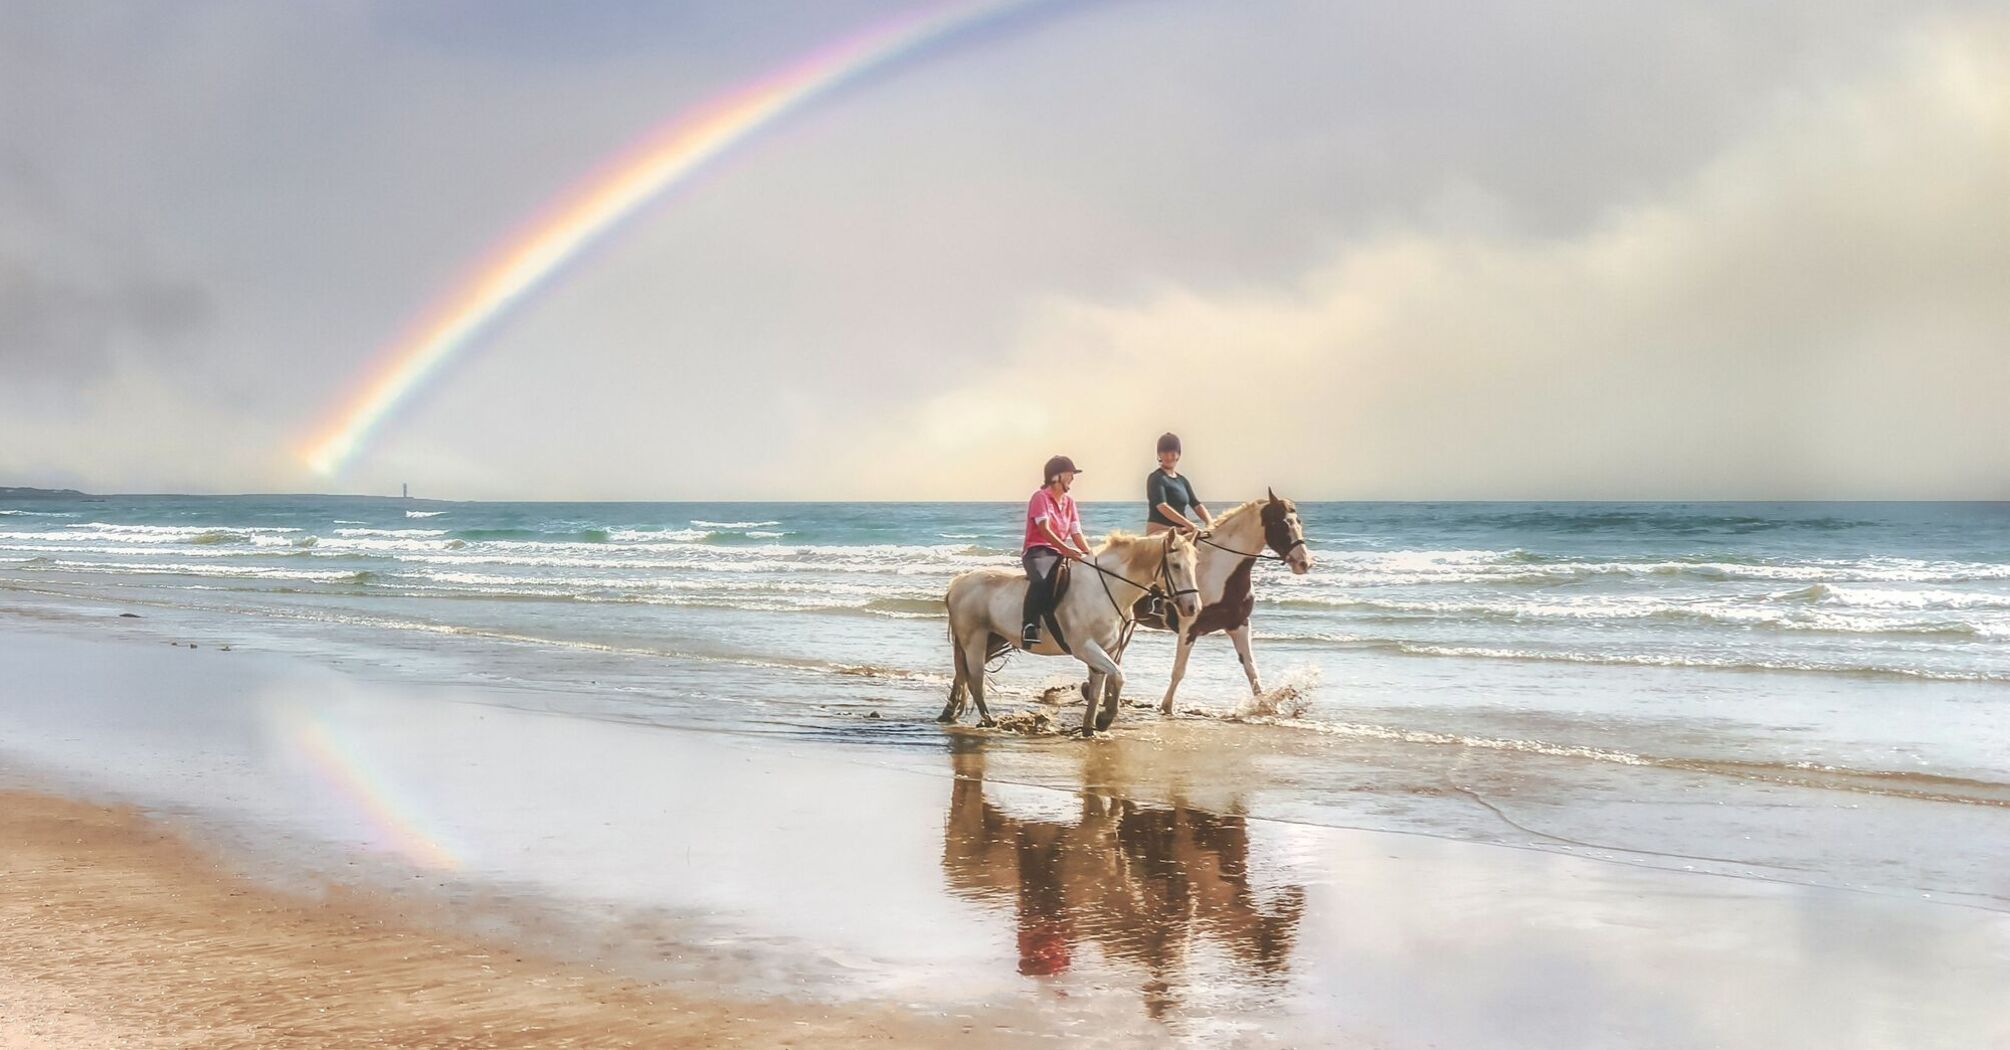 Two people riding horses on a beach with a vibrant rainbow in the background 